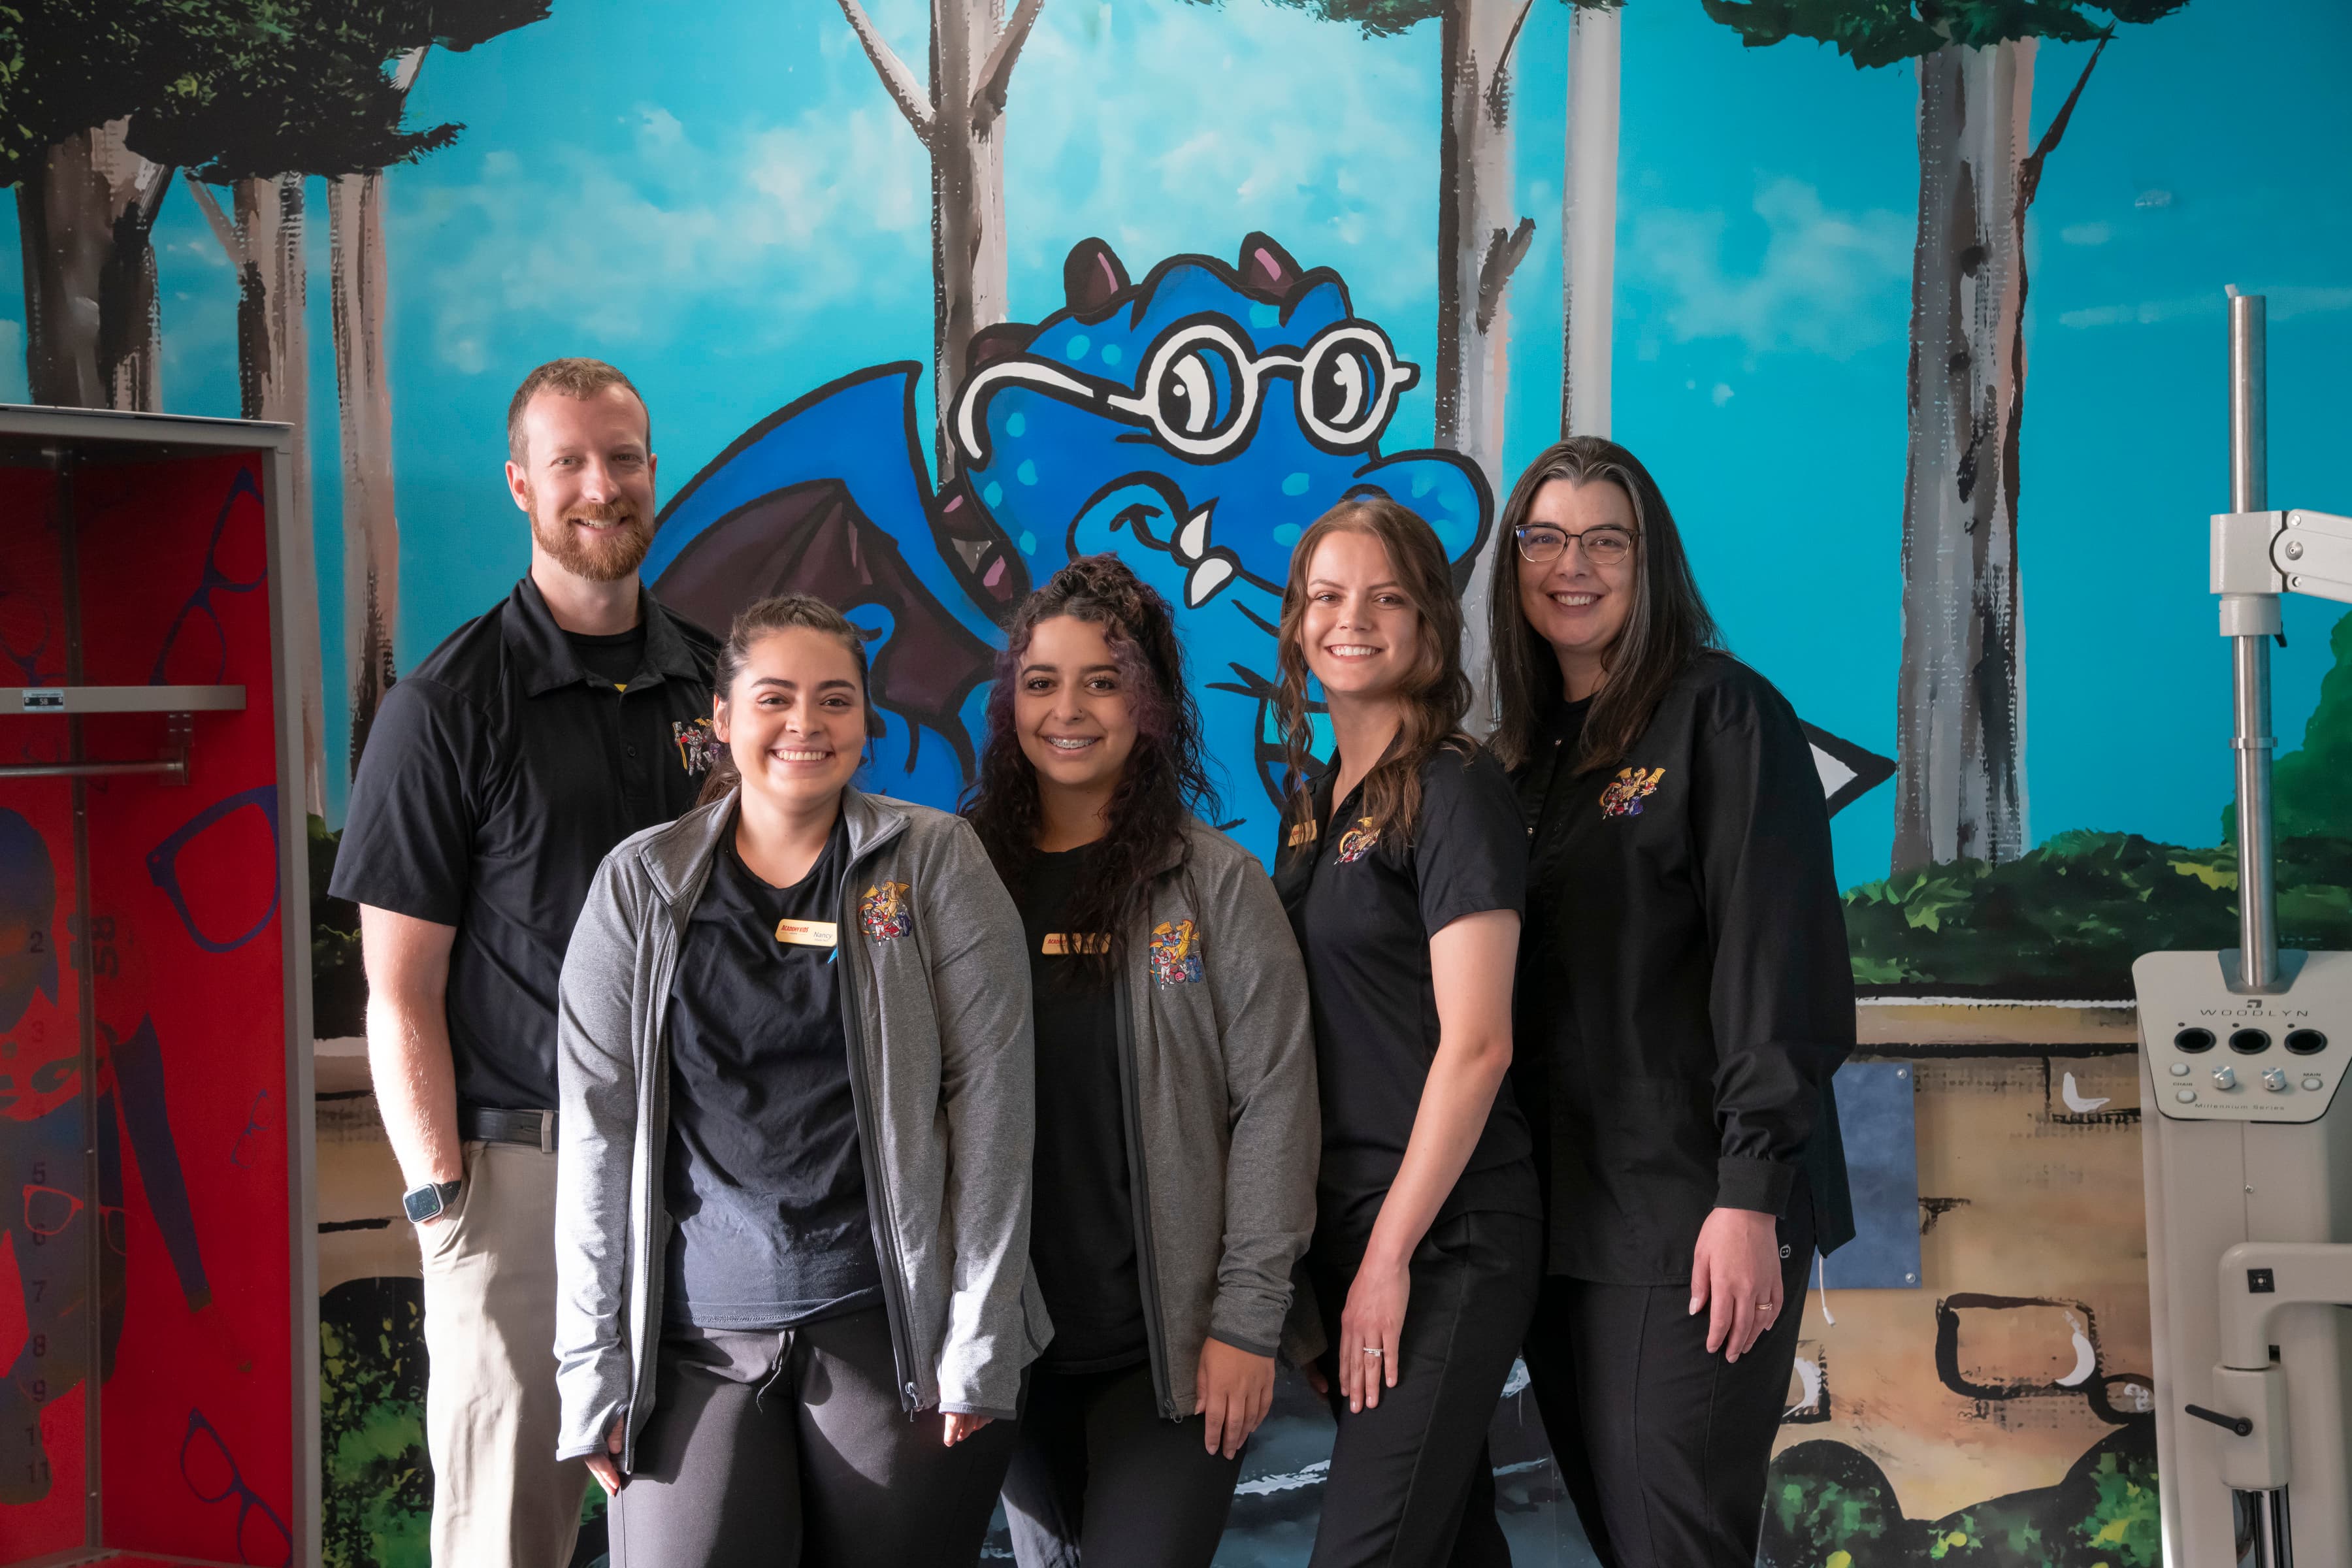 Kid's Optometrist staff at our Pueblo location. There are five people in wearing black and grey medical attire and are standing in front of a kids cartoon.